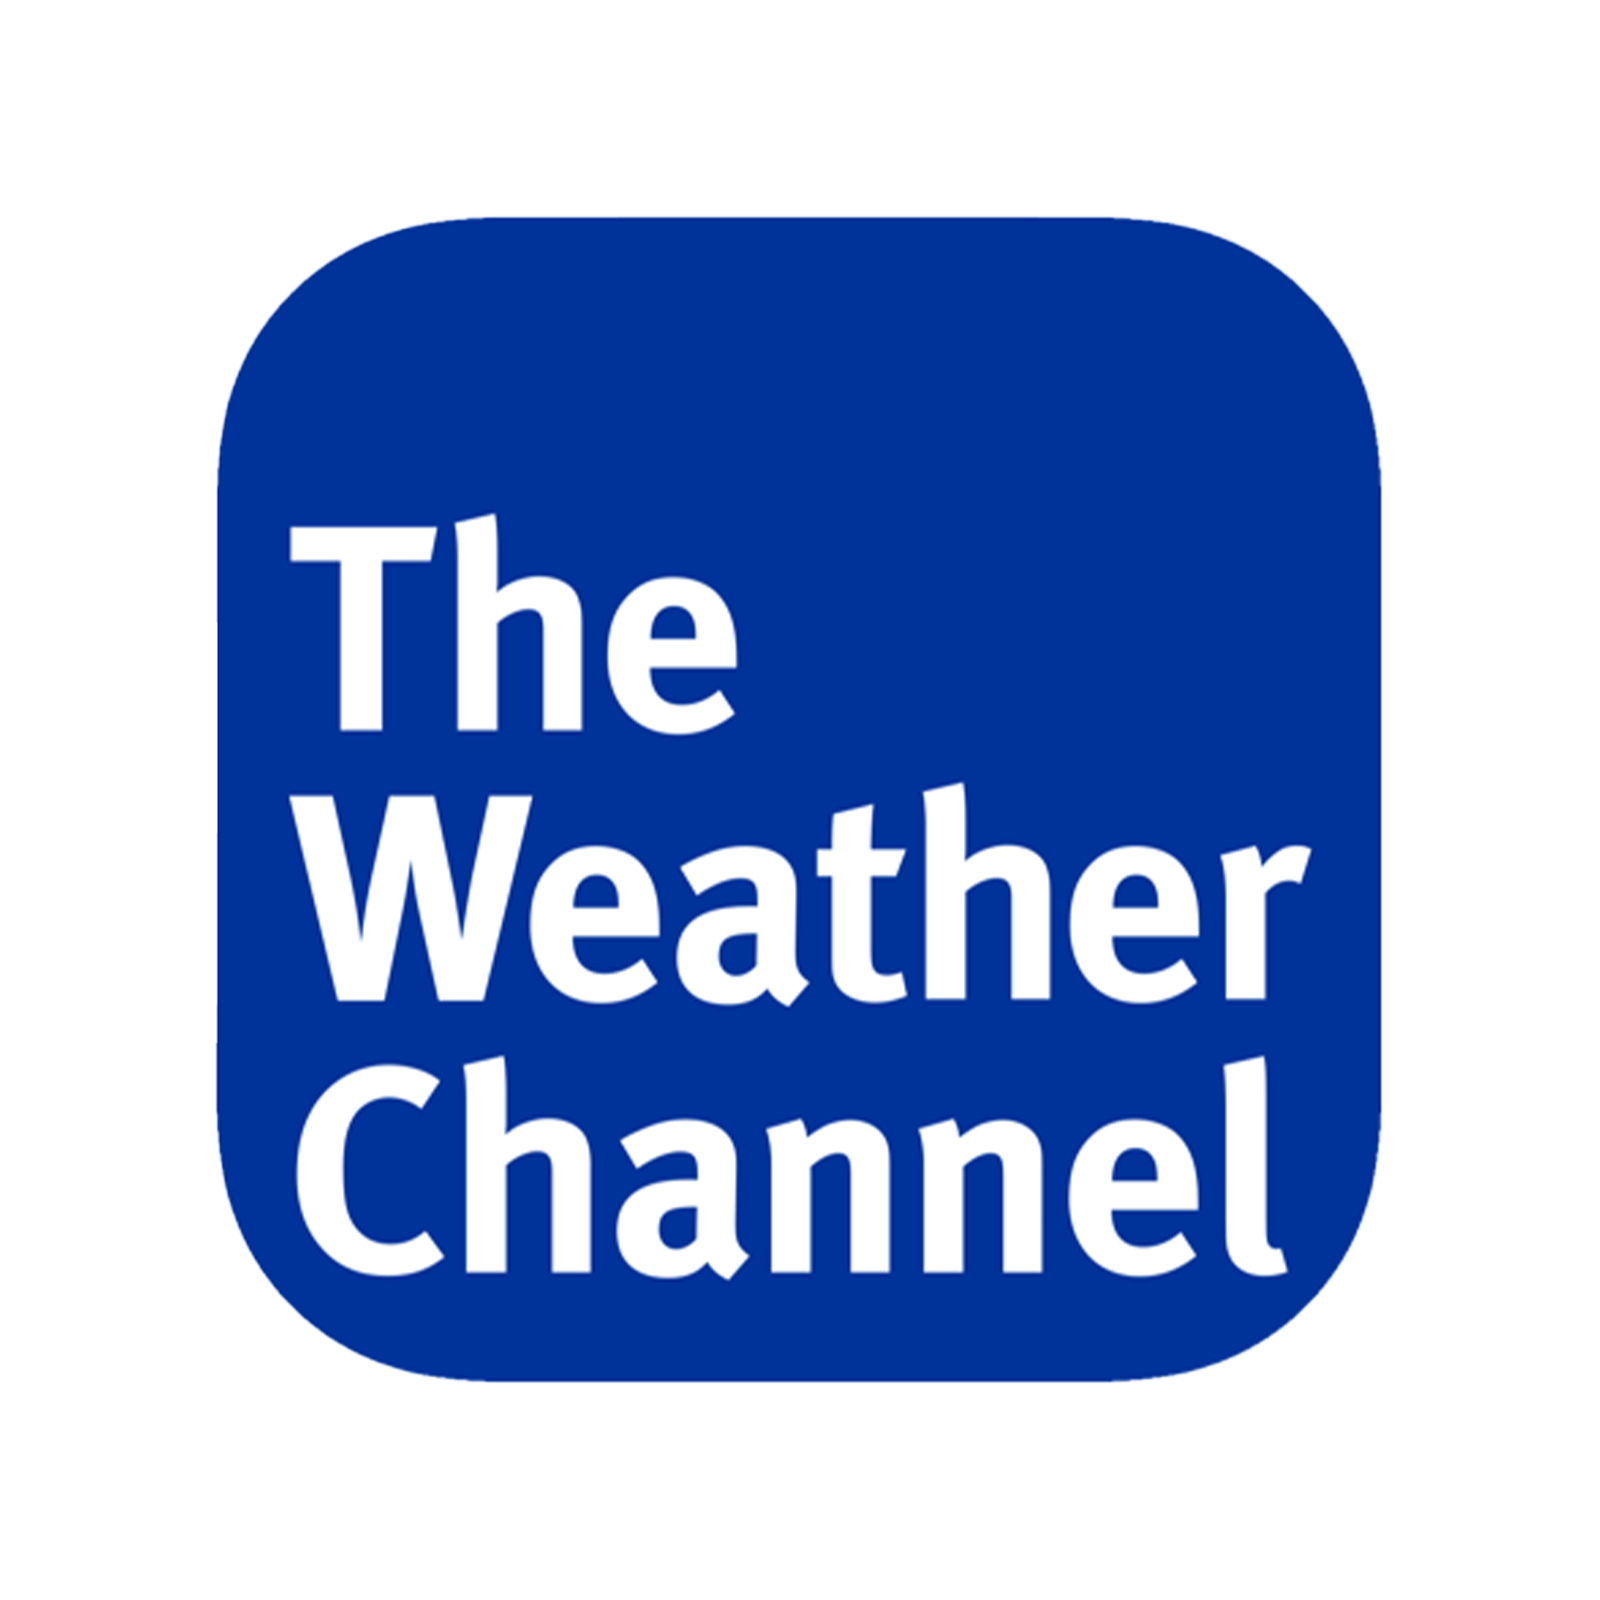 The Weather Channel Ecomm Via Apple.com 001